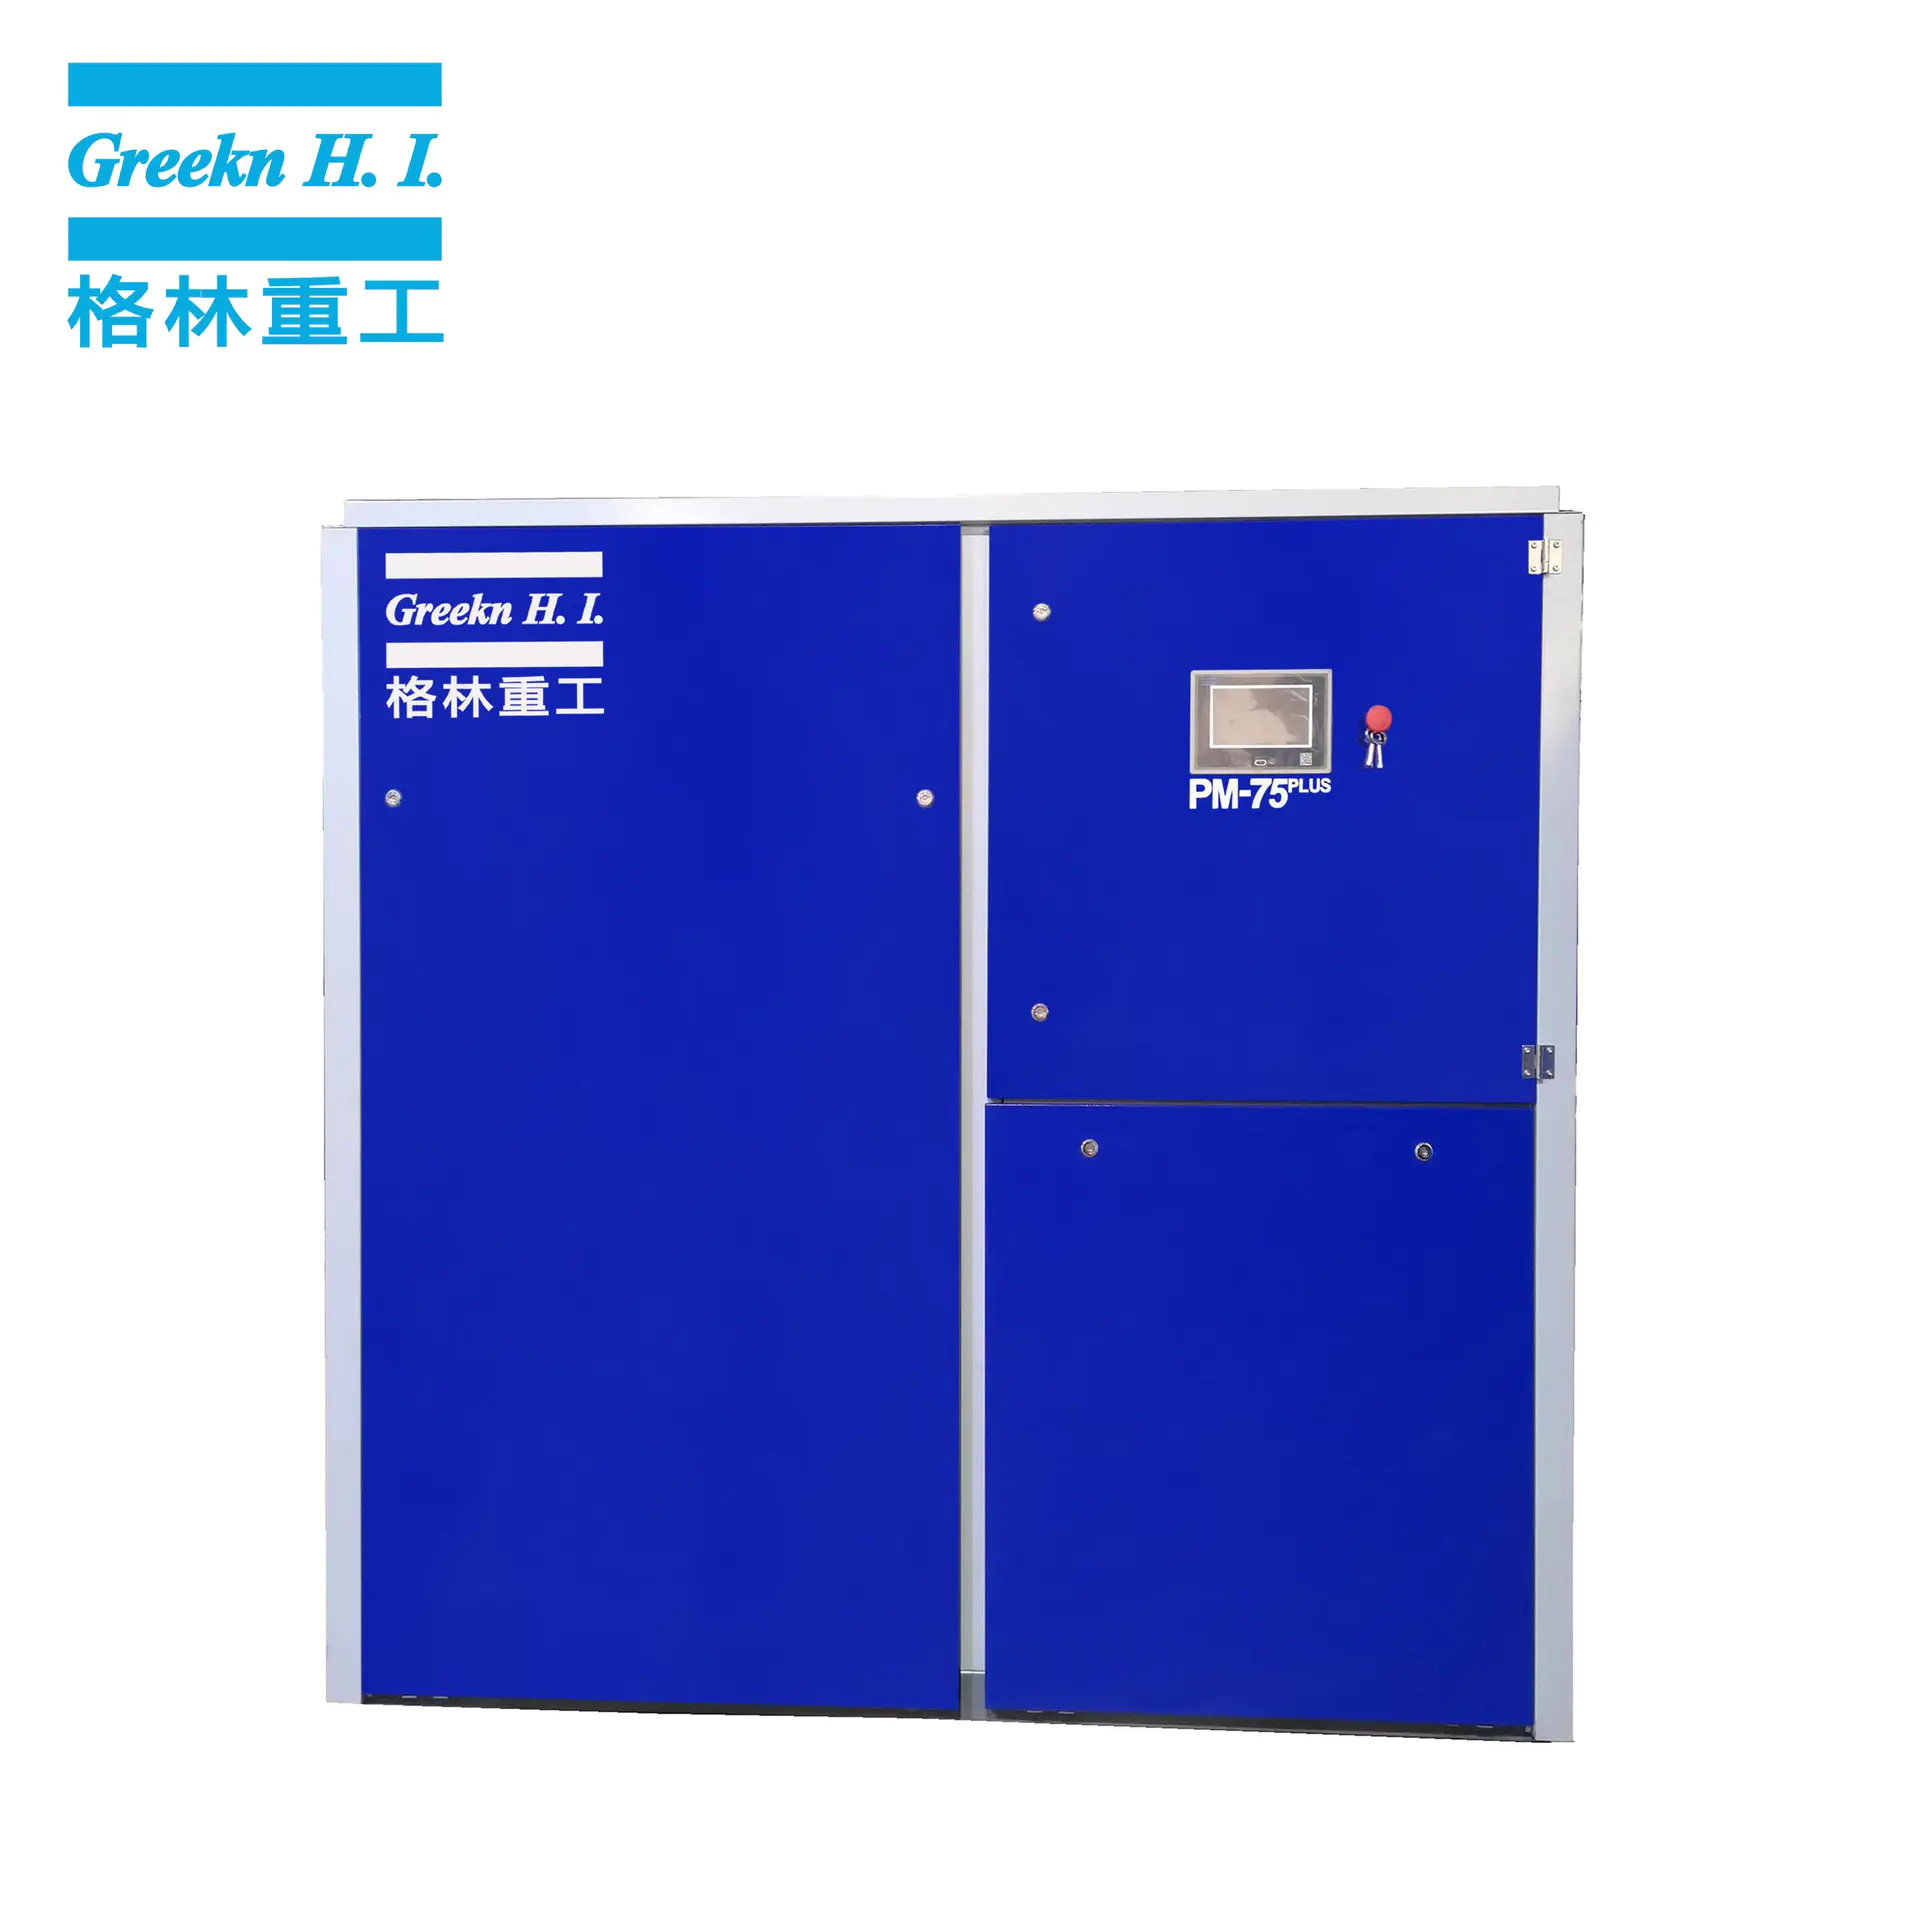 PM75PLUS 75kw Two stage permanent magnet motor screw air compressor